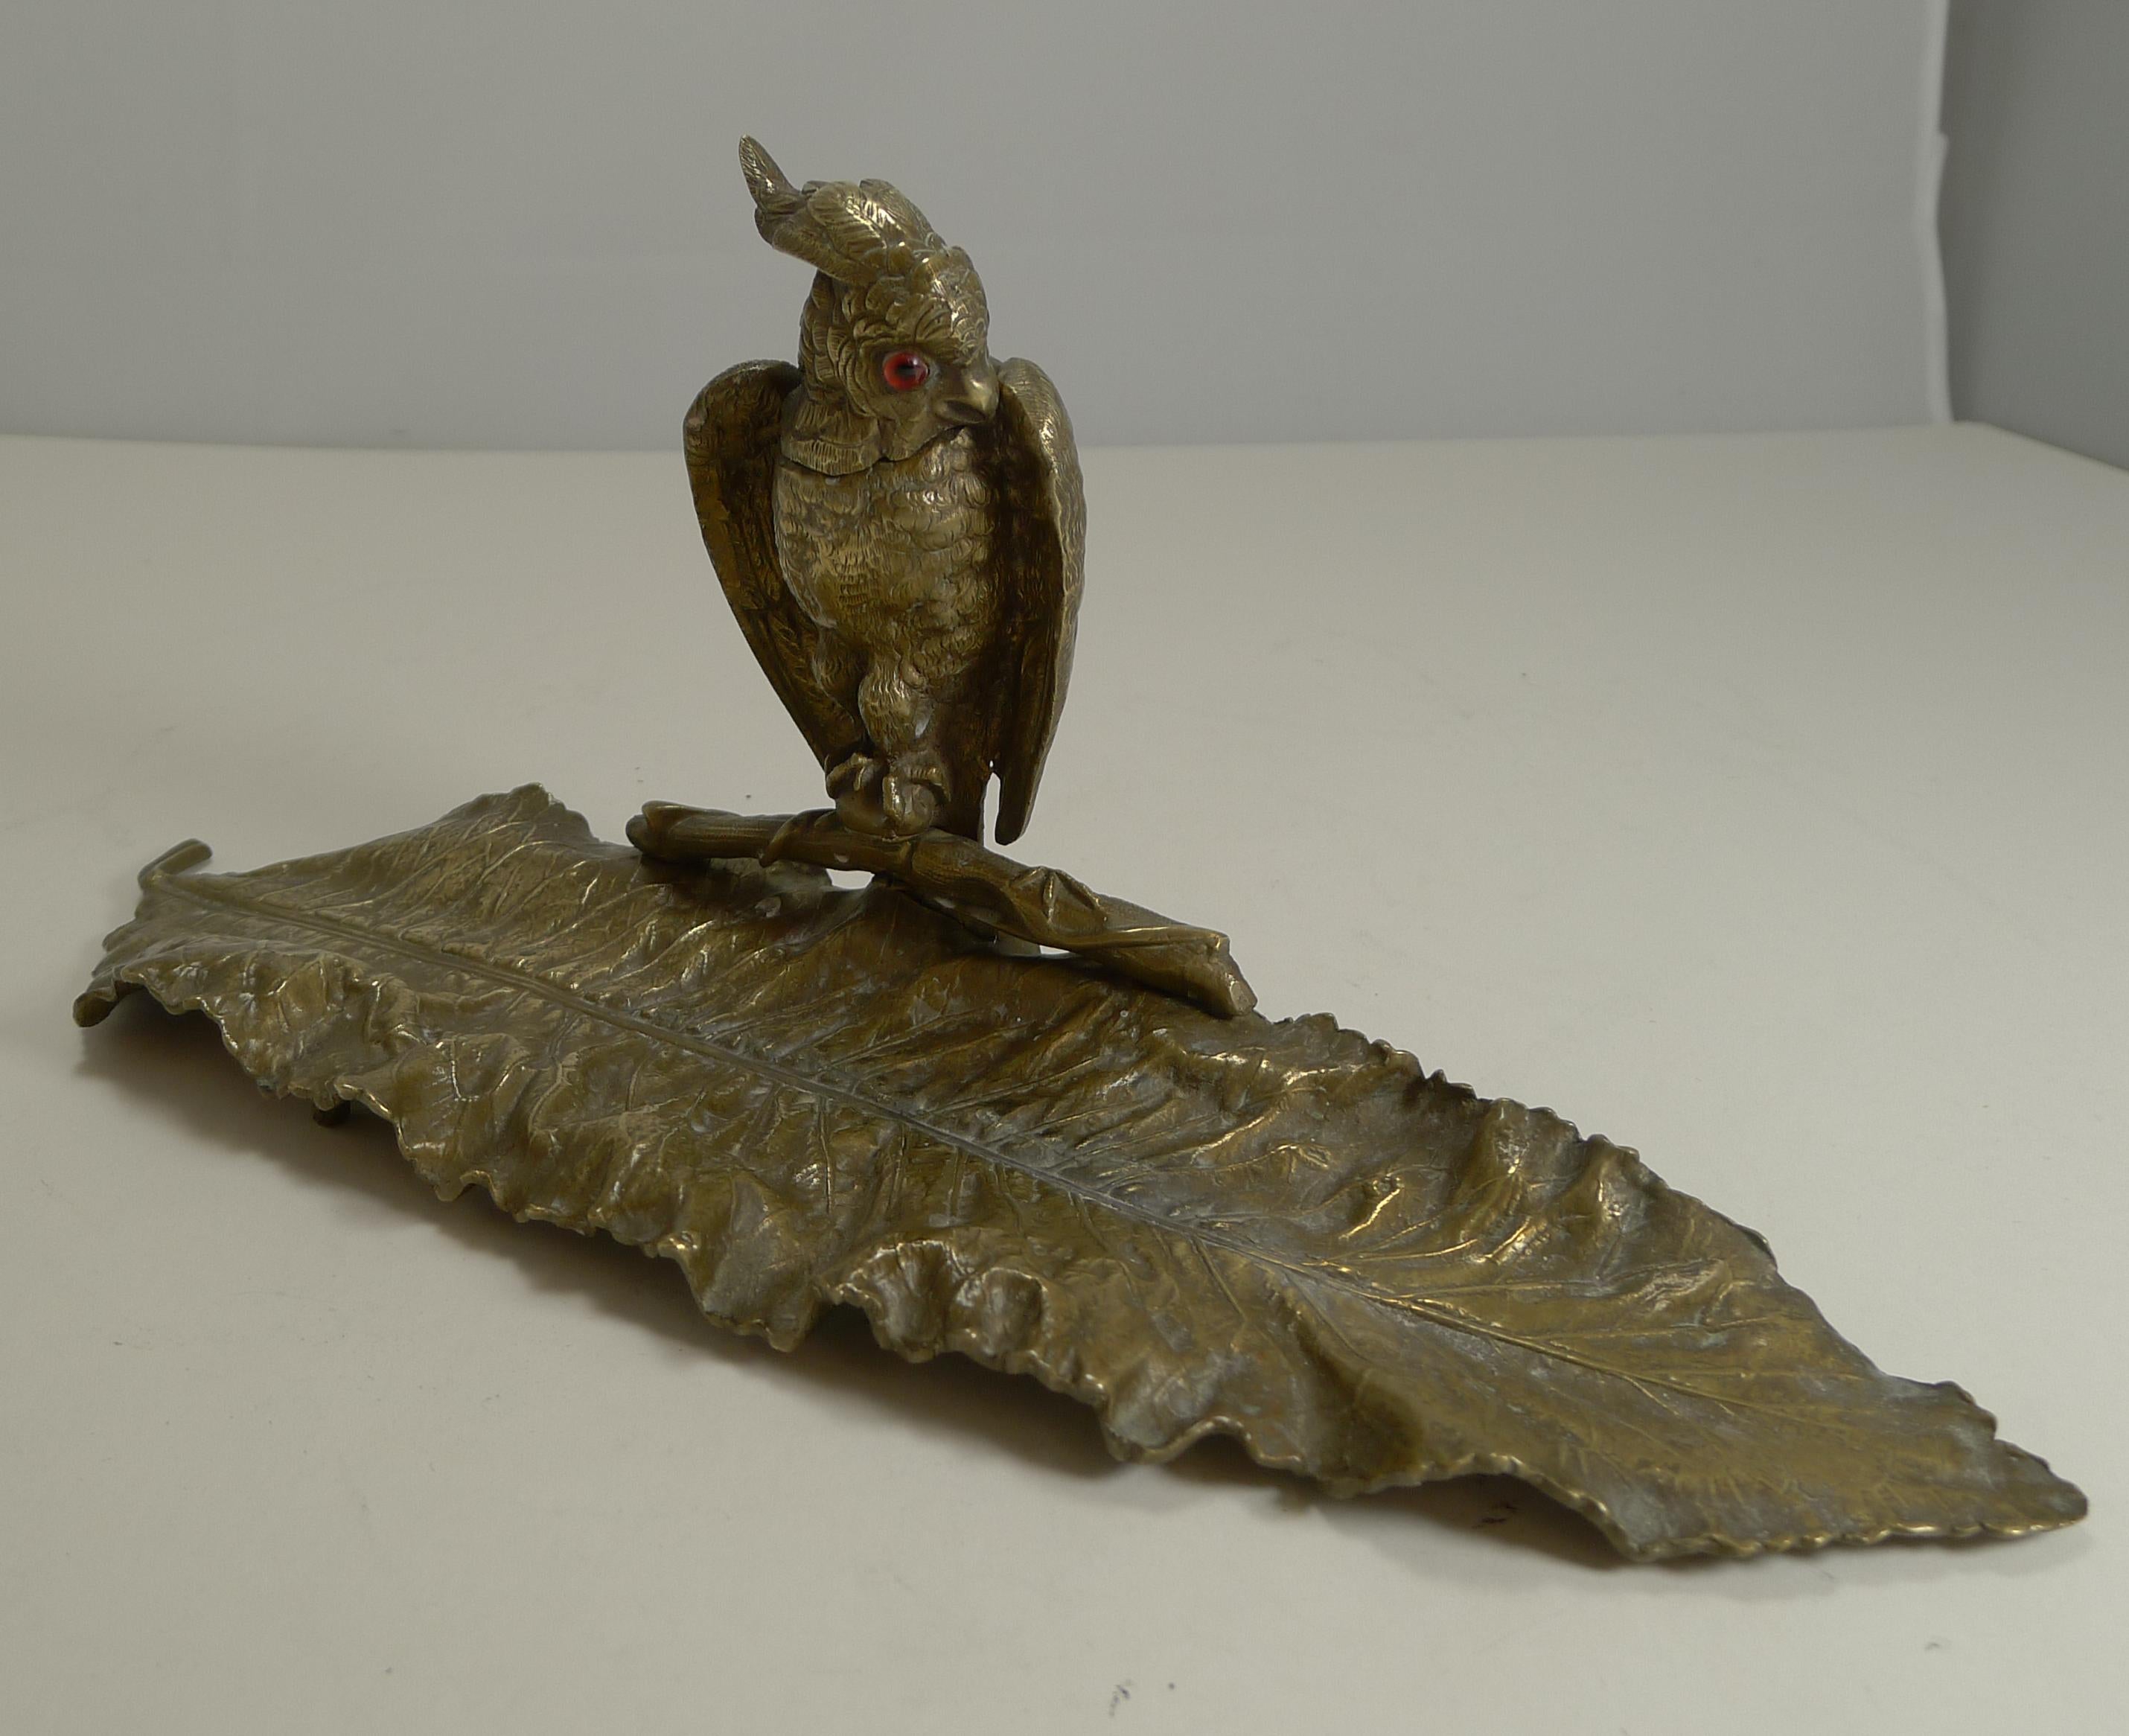 Brass Magnificent Antique English Novelty Inkwell / Pen Tray - Parrot With Glass Eyes For Sale